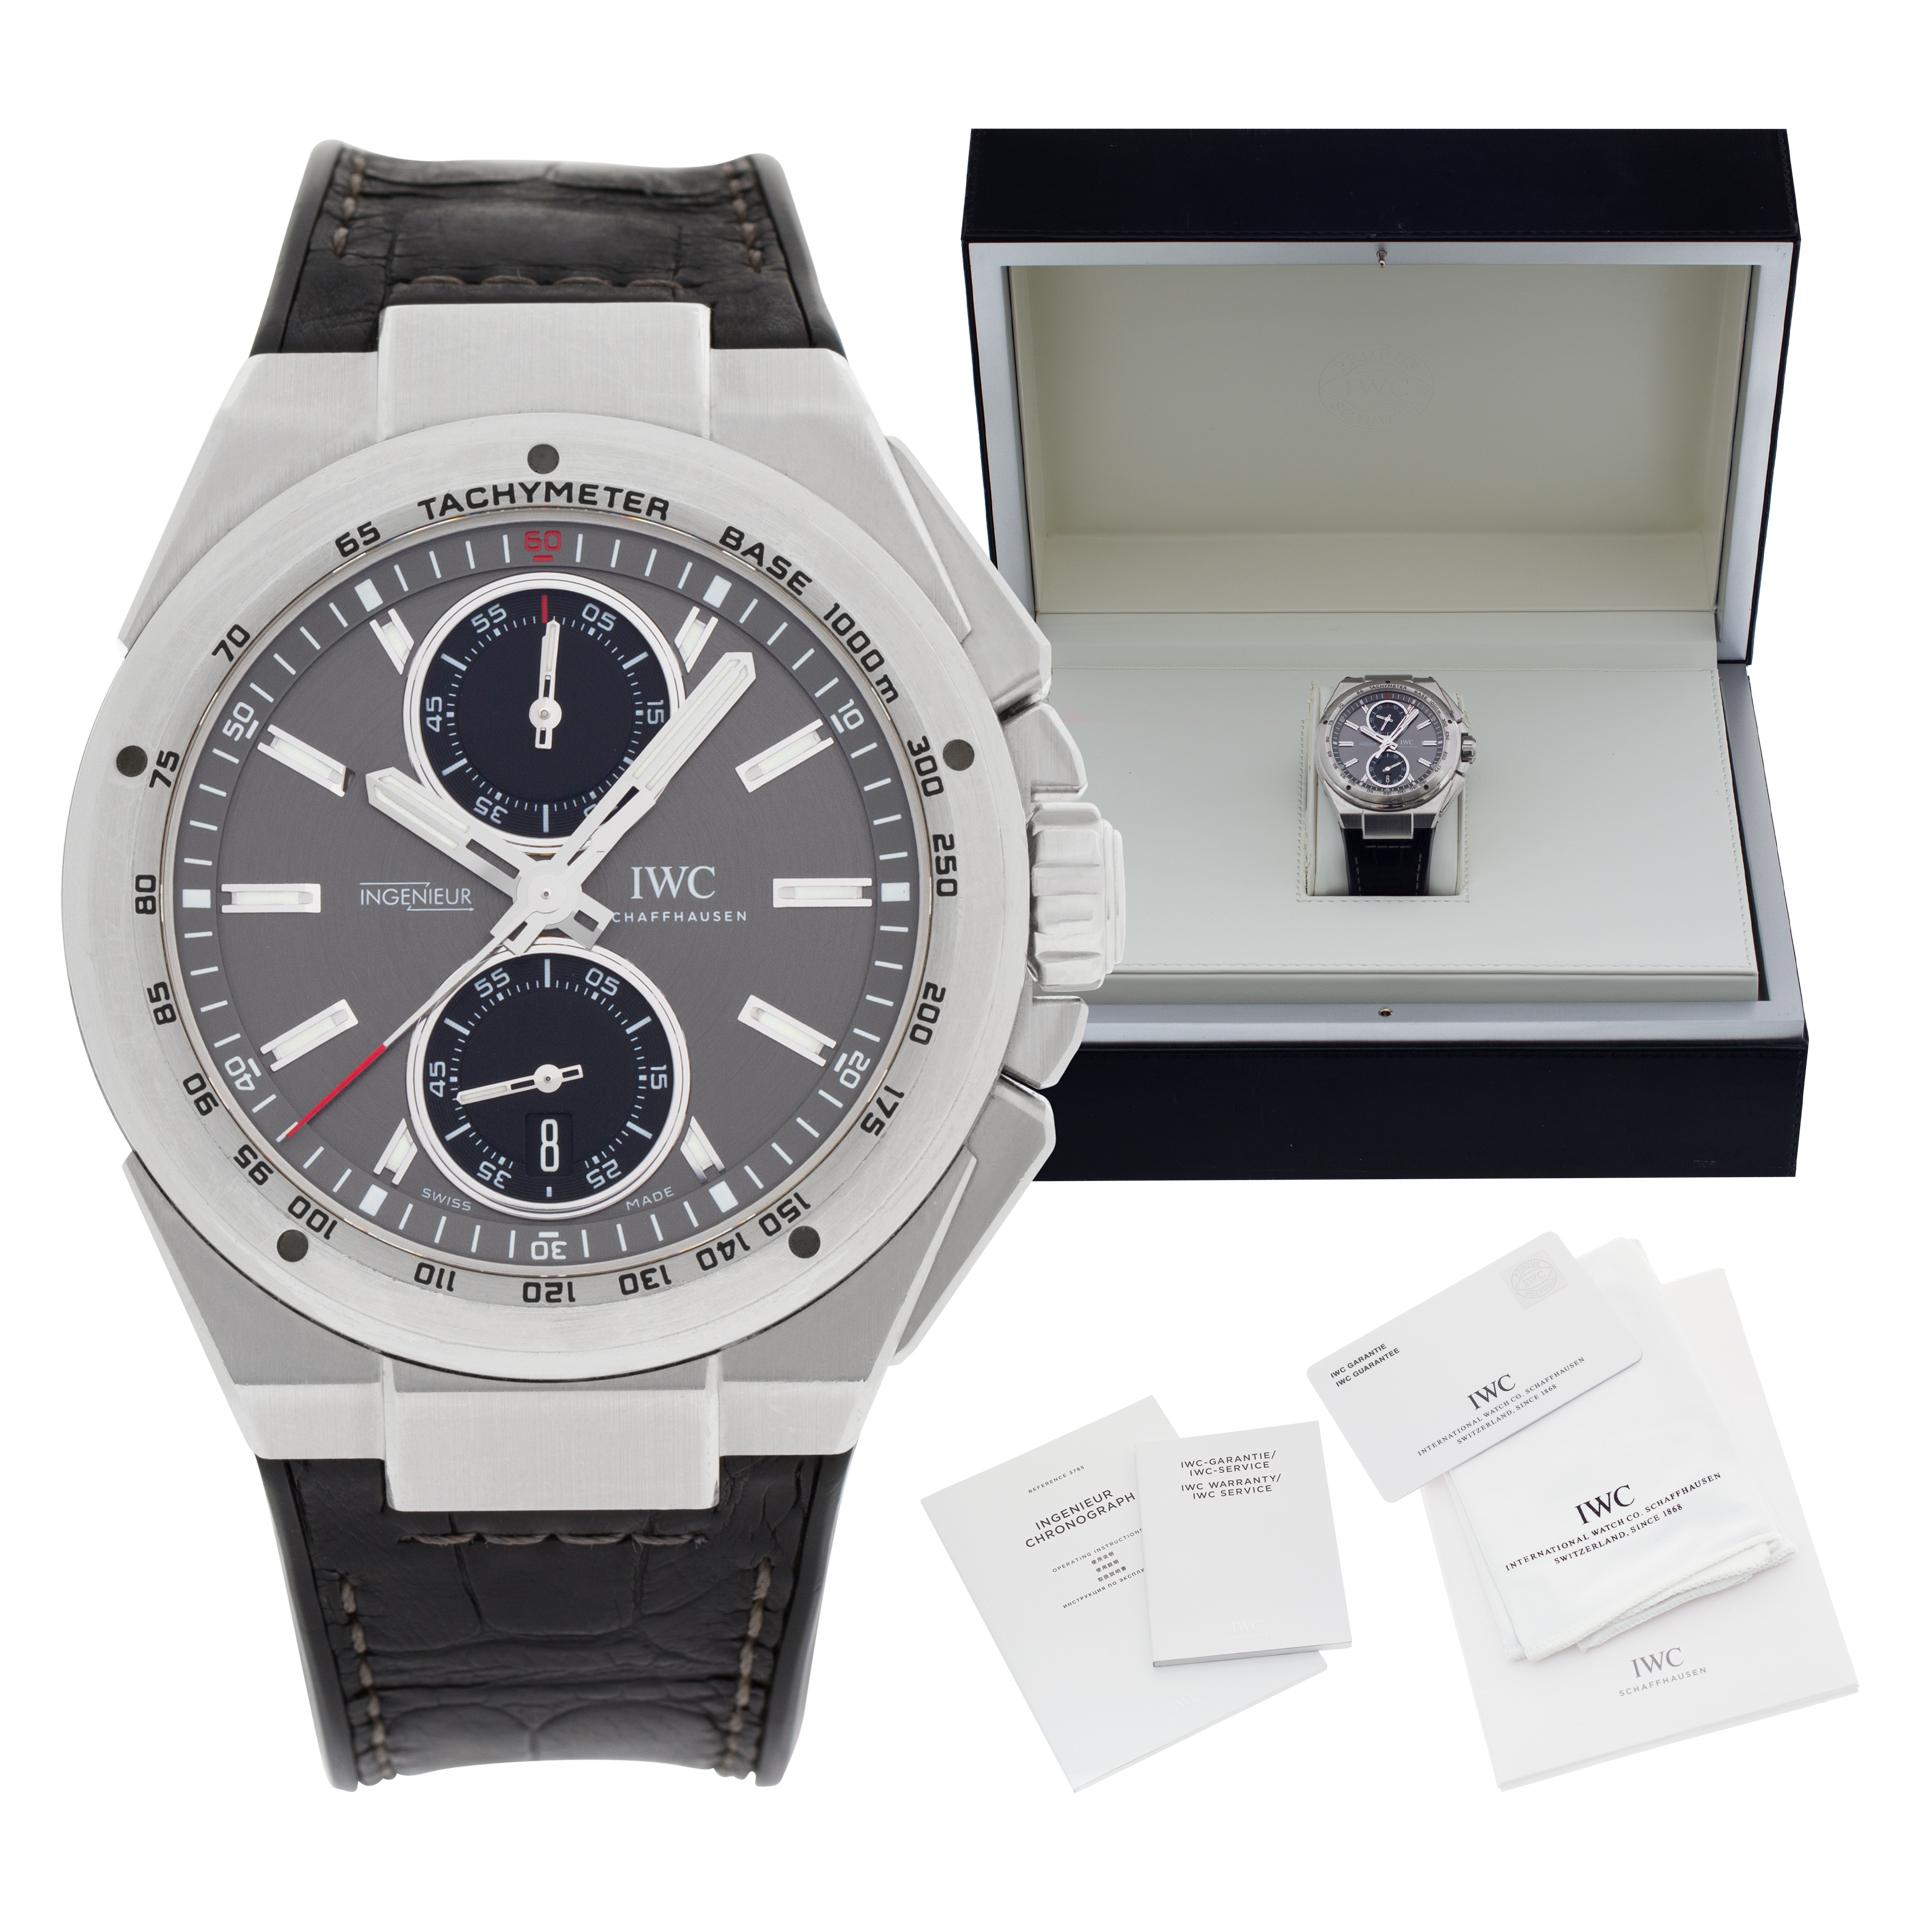 IWC Ingenieur Chronograph Racer Ardoise Dial in stainless steel on leather strap with tang buckle. Auto, chrono and sub-seconds. 46 mm case size. Box and papers. Ref IW378507. Circa 2014 Fine Pre-owned IWC Watch.

Certified preowned Sport IWC